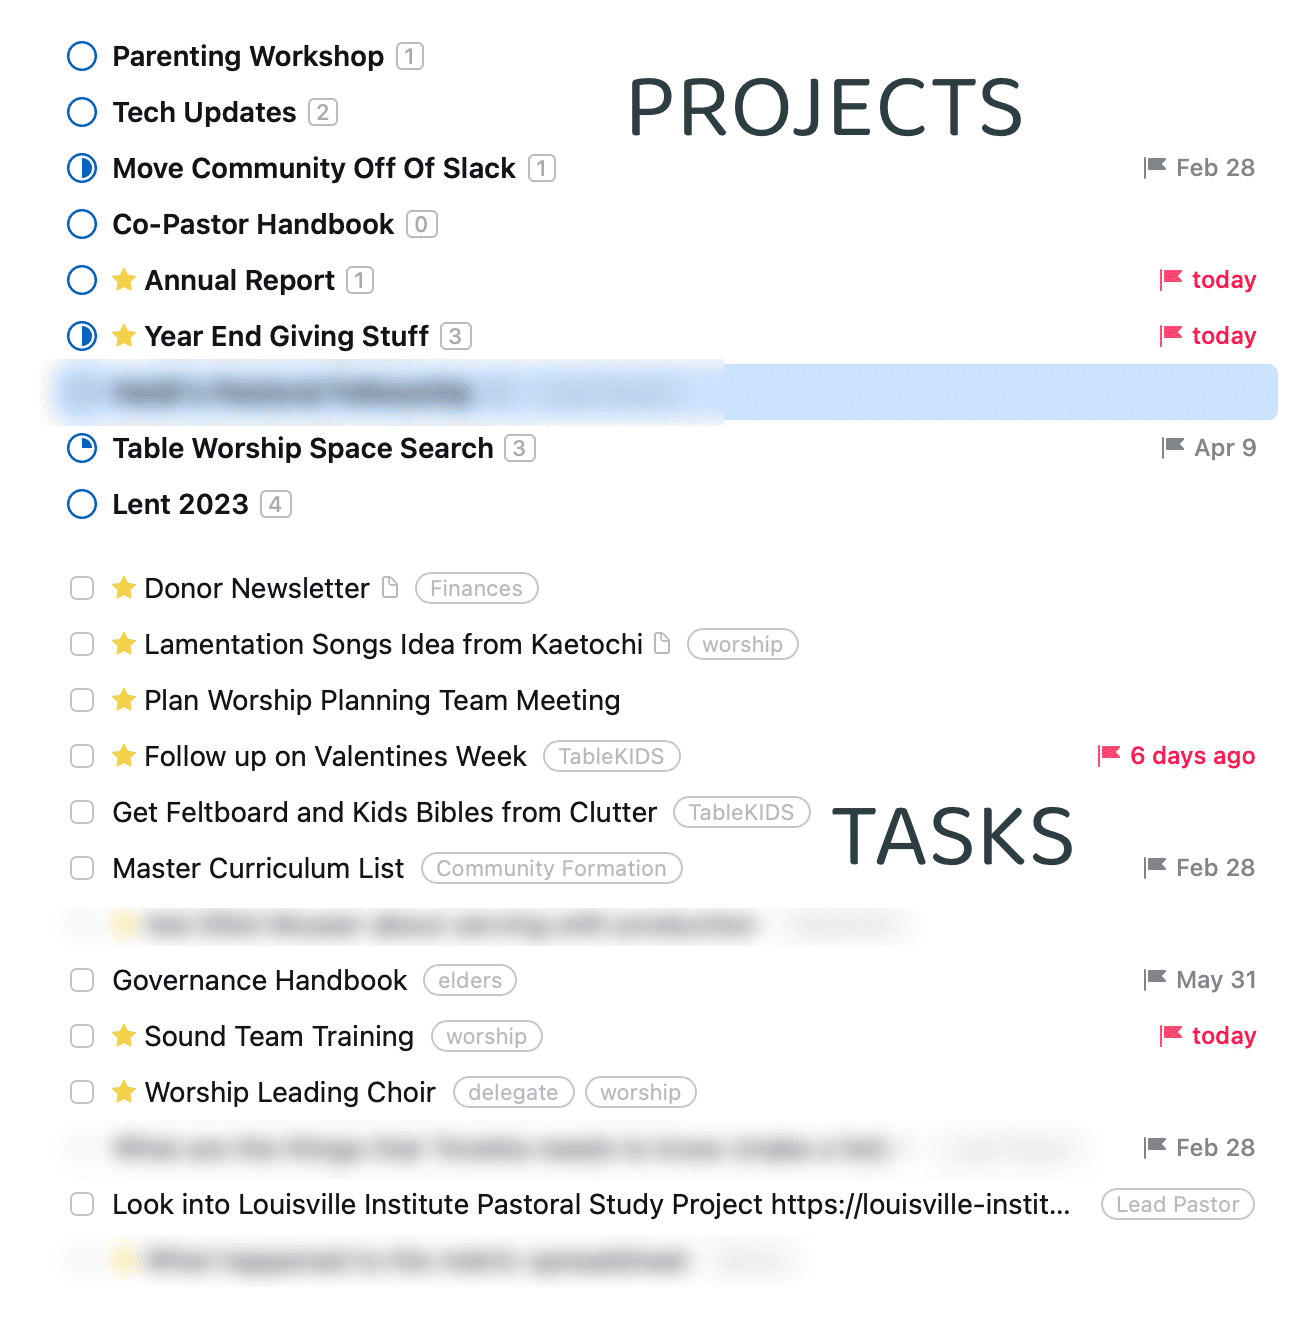 My Projects and Tasks